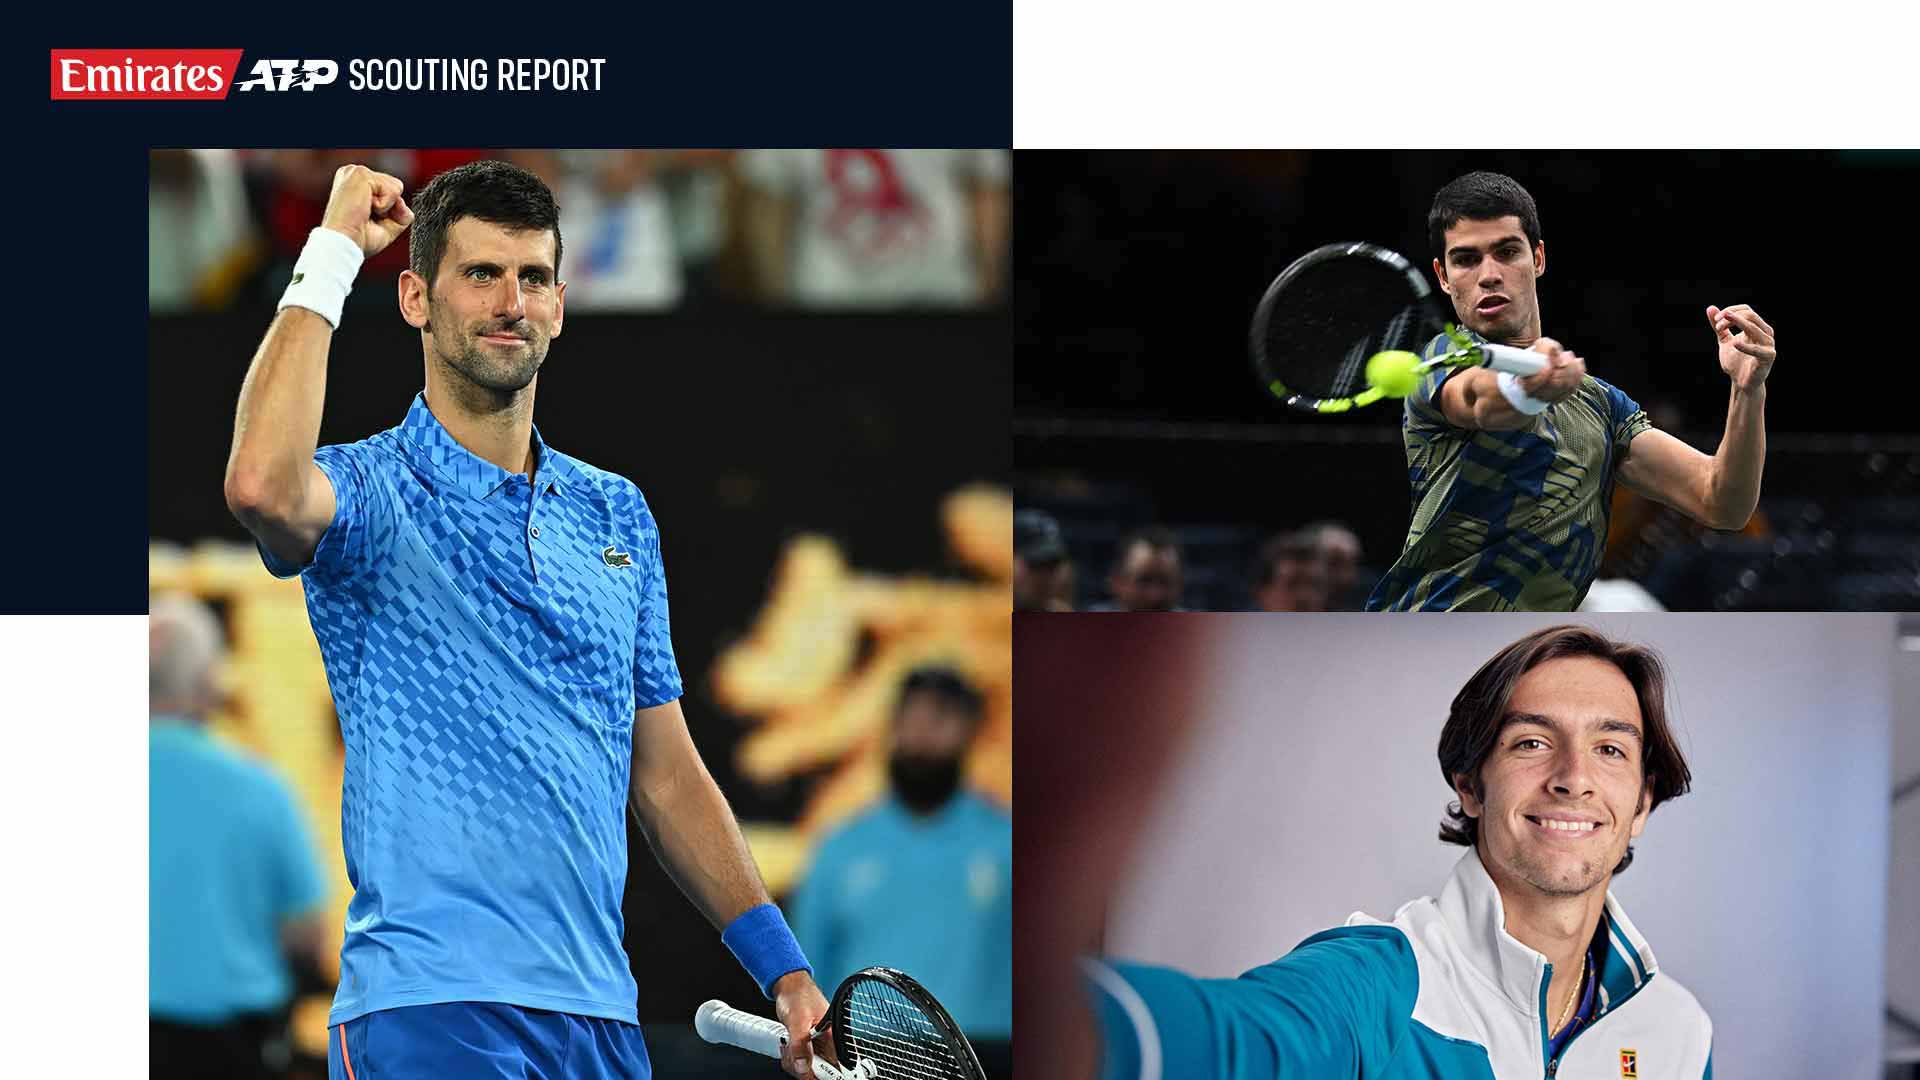 Novak Djokovic, Carlos Alcaraz and Lorenzo Musetti are in action on the ATP Tour this week.